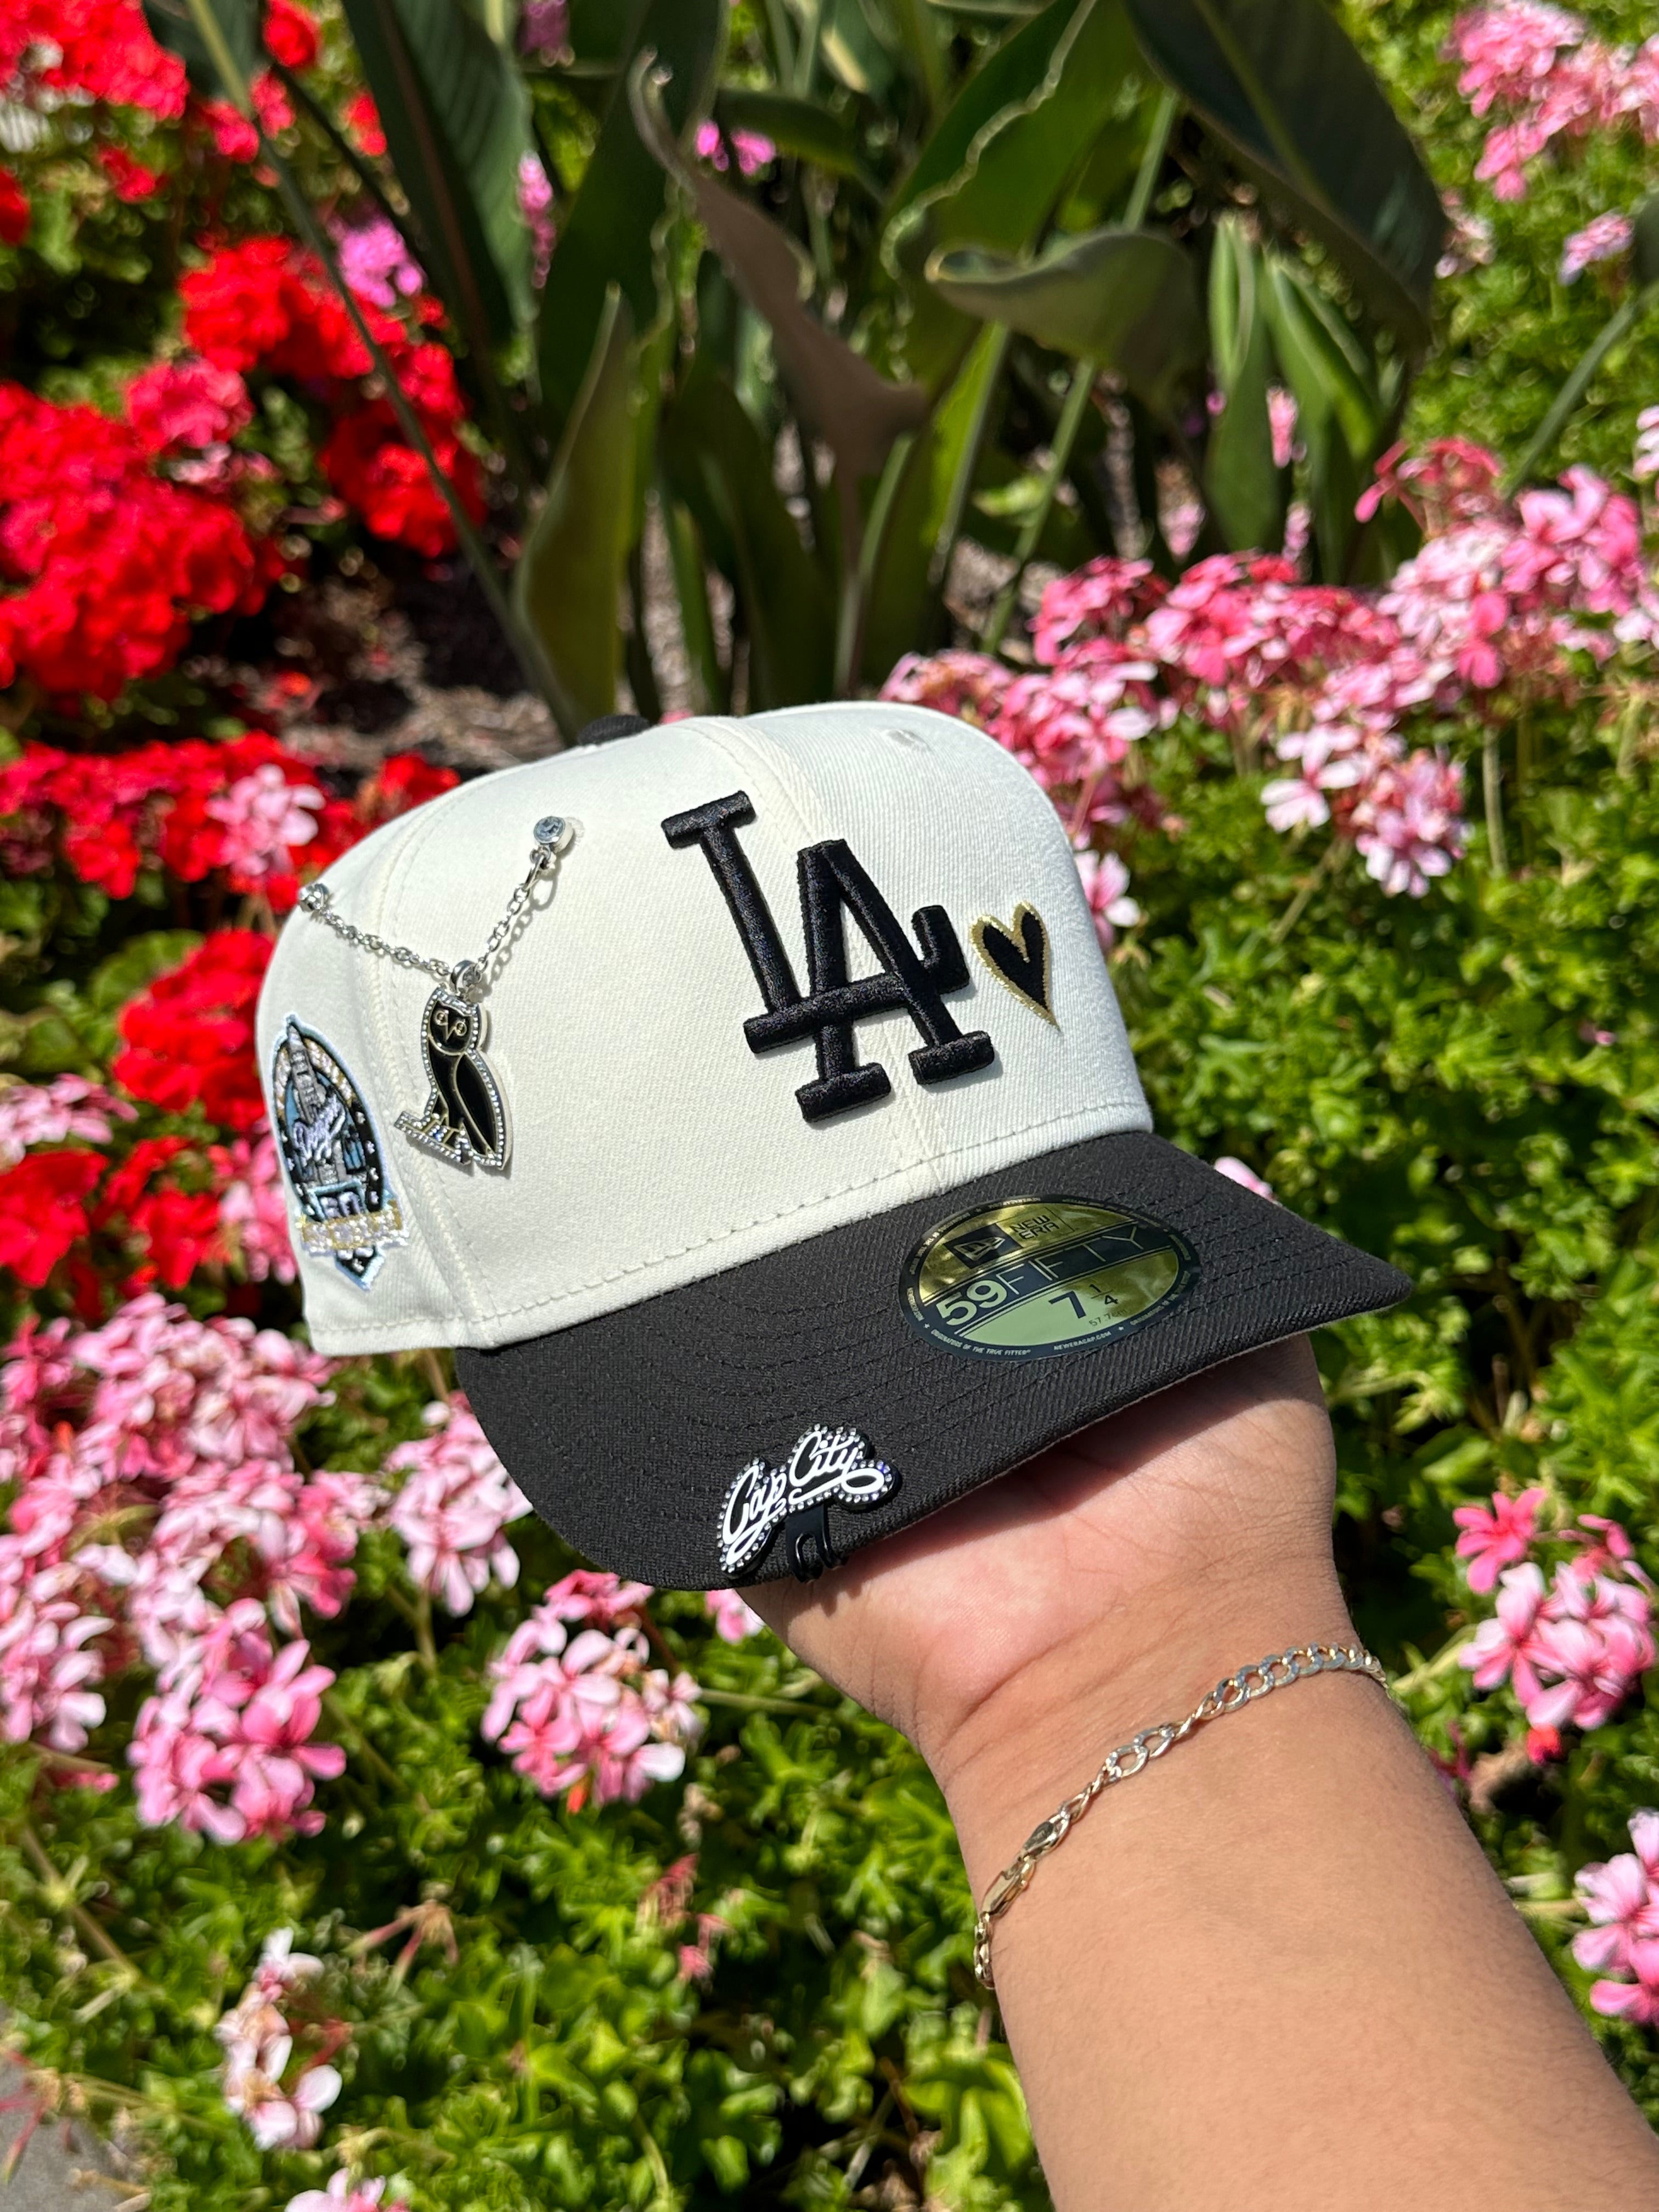 NEW ERA EXCLUSIVE 59FIFTY CHROME WHITE/BLACK LOS ANGELES DODGERS W/ HEART + 60TH ANNIVERSARY SIDE PATCH